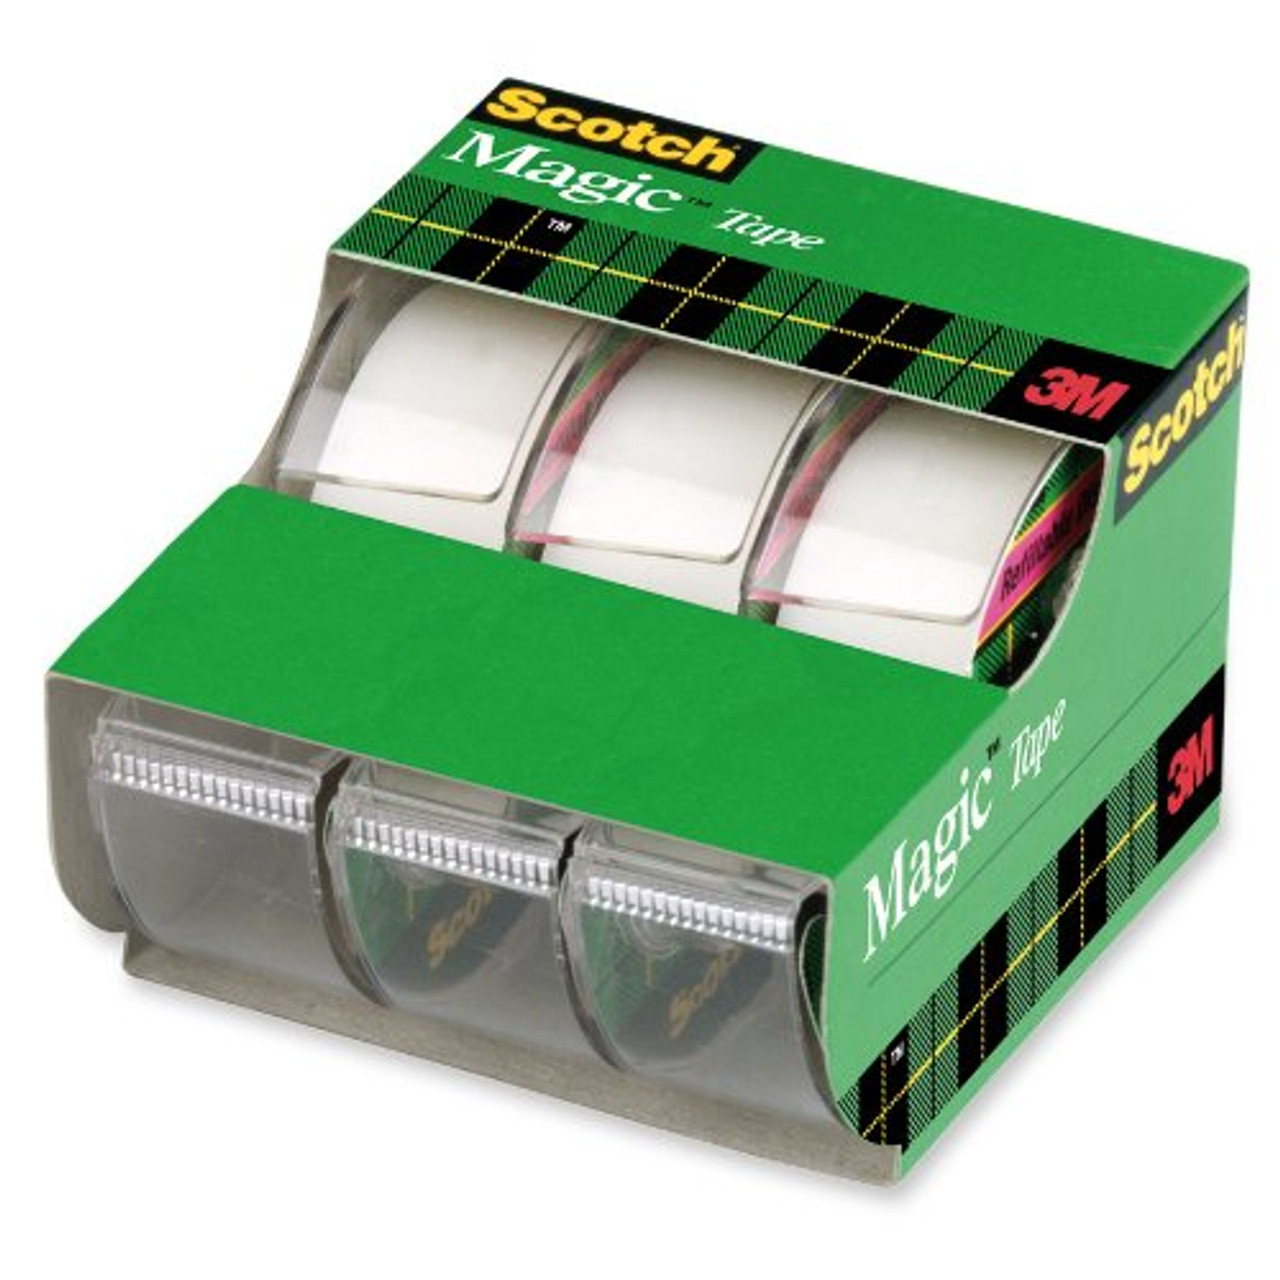 Achieve the Perfect Finish with Scotch Magic Tape and Scotch GiftWrap Tape